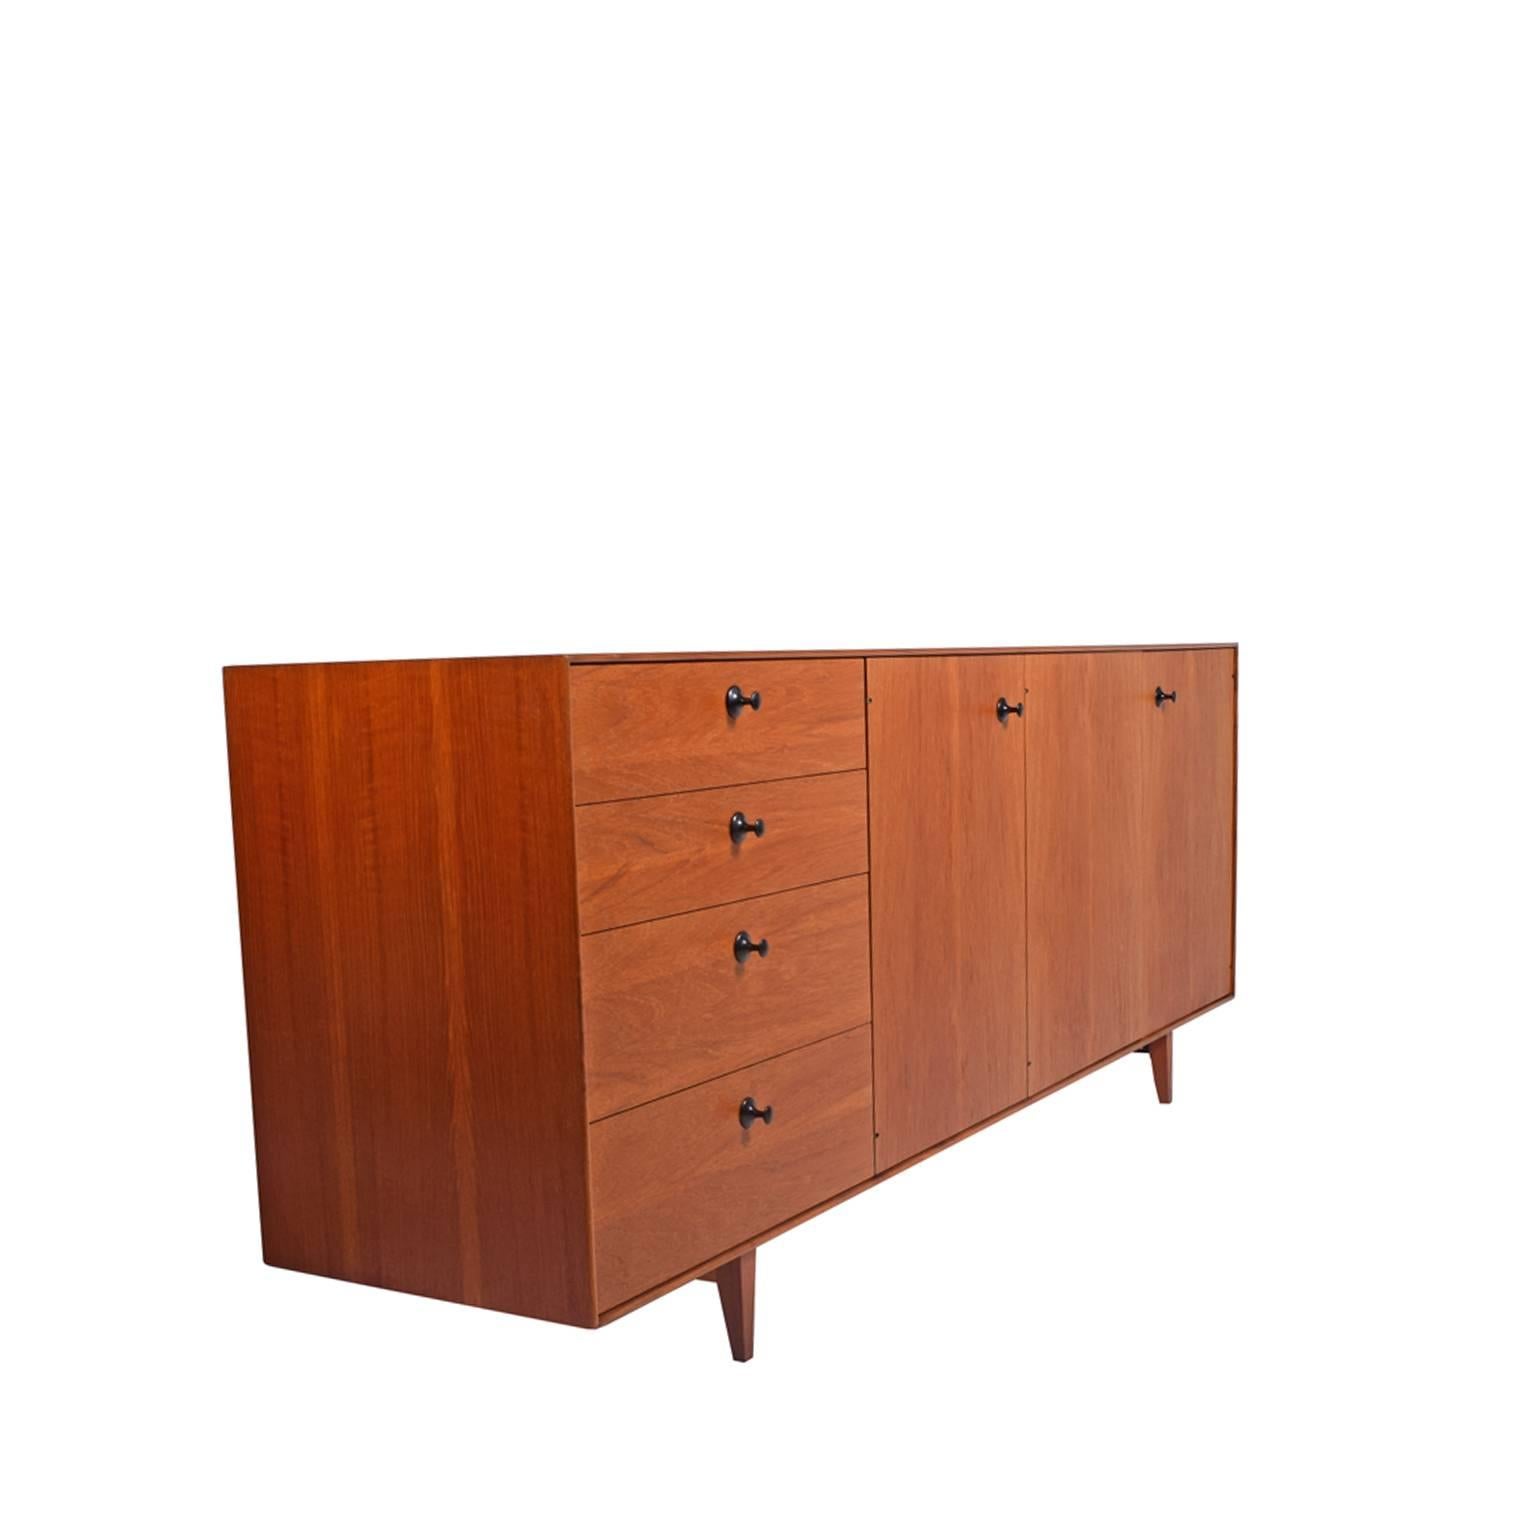 Mid-Century Modern Teak Thin Edge Cabinet by George Nelson and Associates for Herman Miller